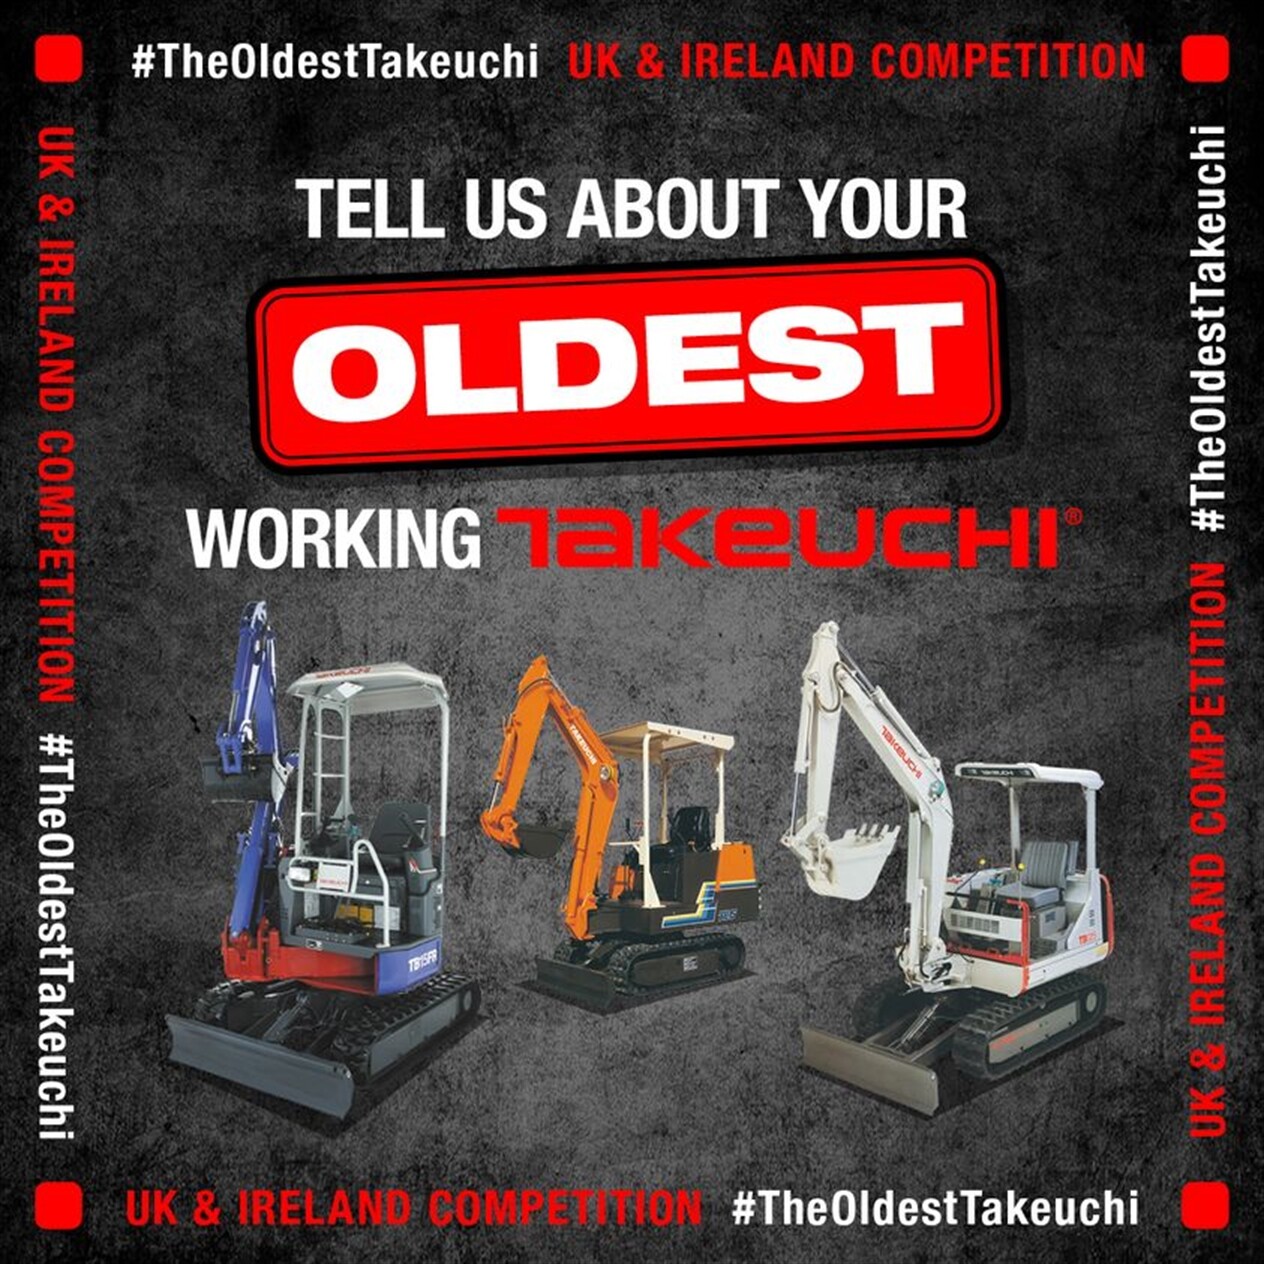 Have You Got the Oldest Working Takeuchi?